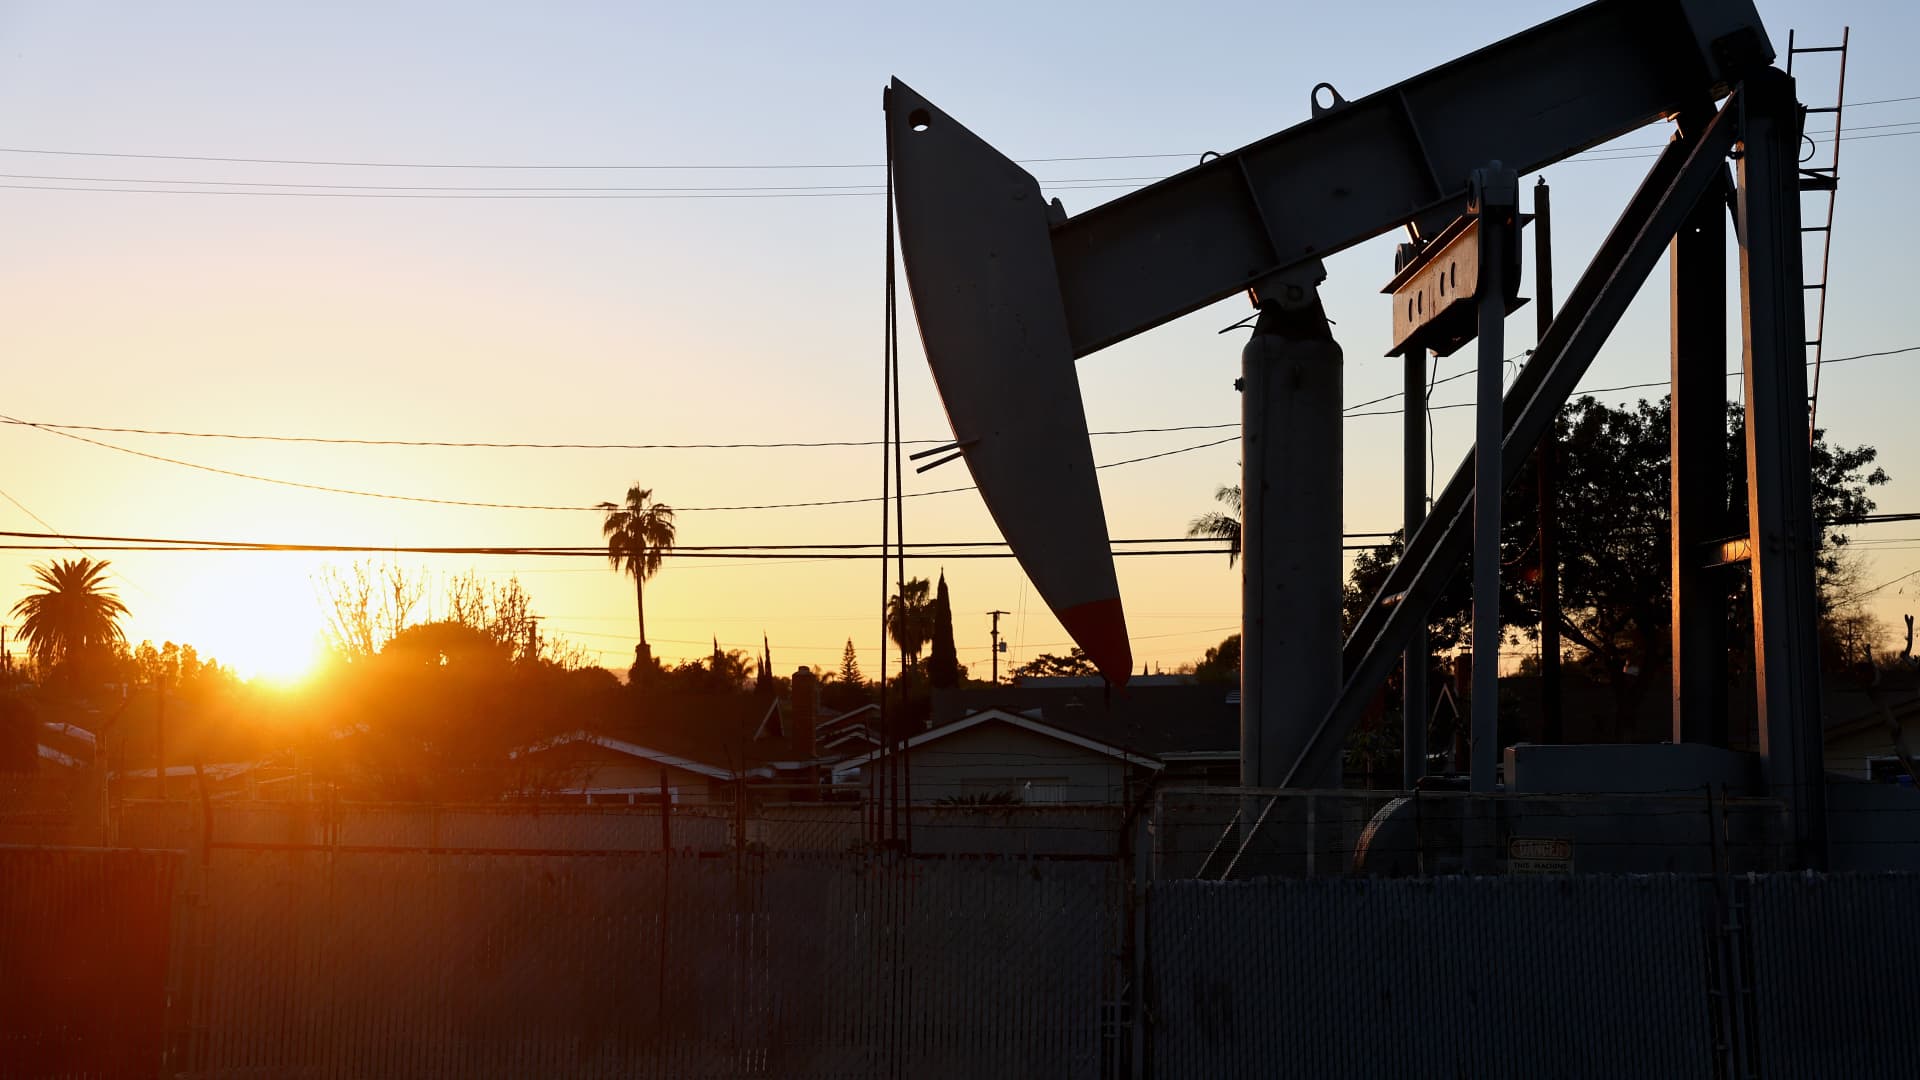 'Top conviction call:' Analysts say it's time to get back into oil — and name stocks to buy